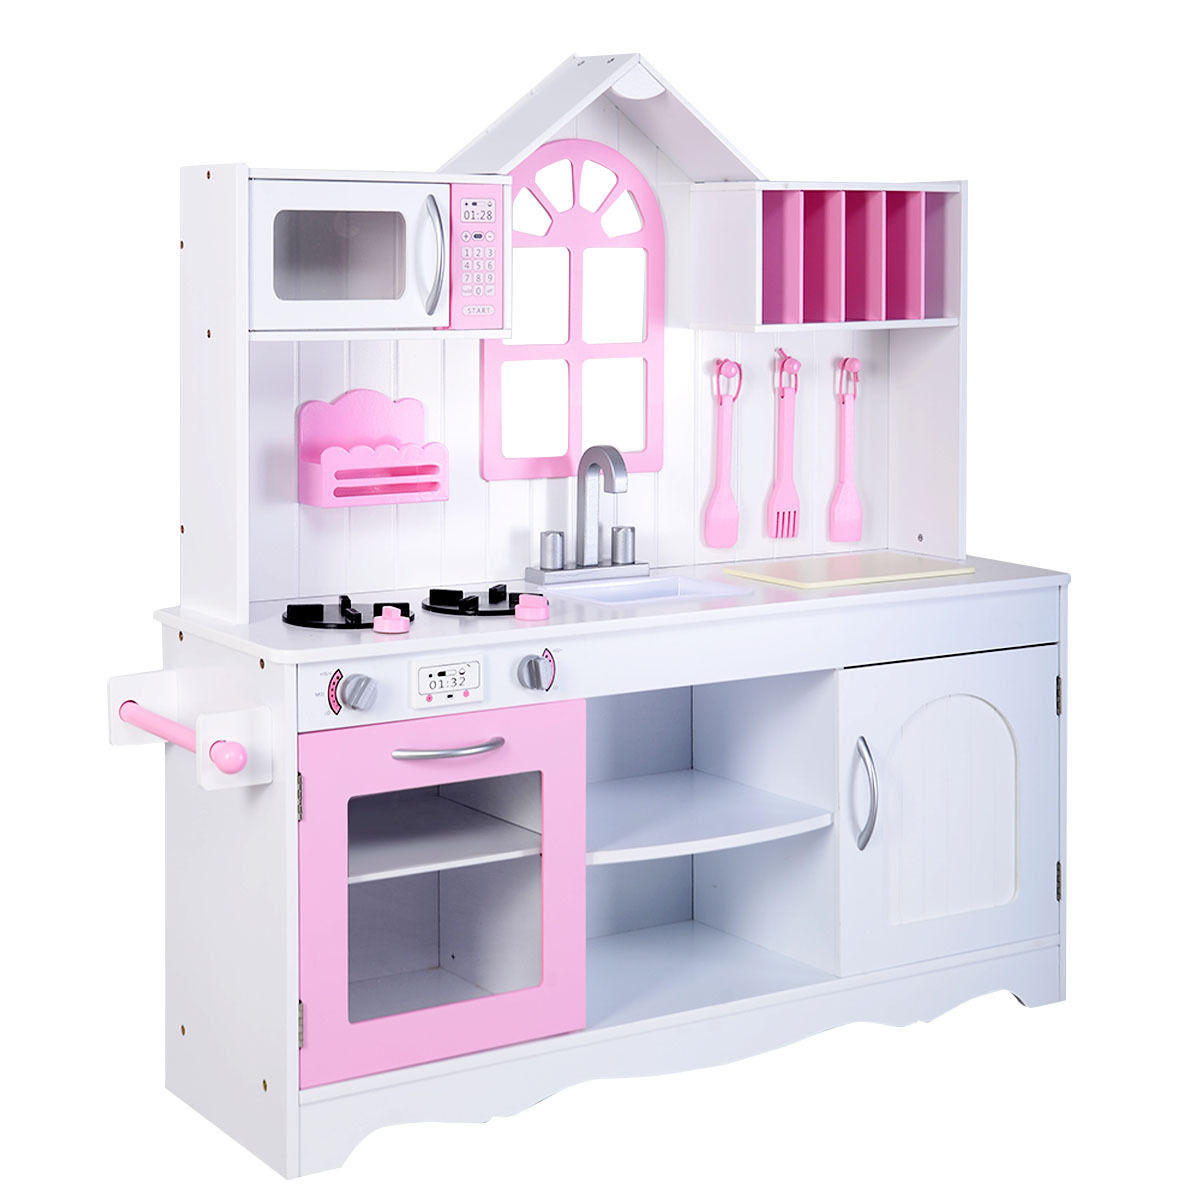 pink kitchen for toddlers